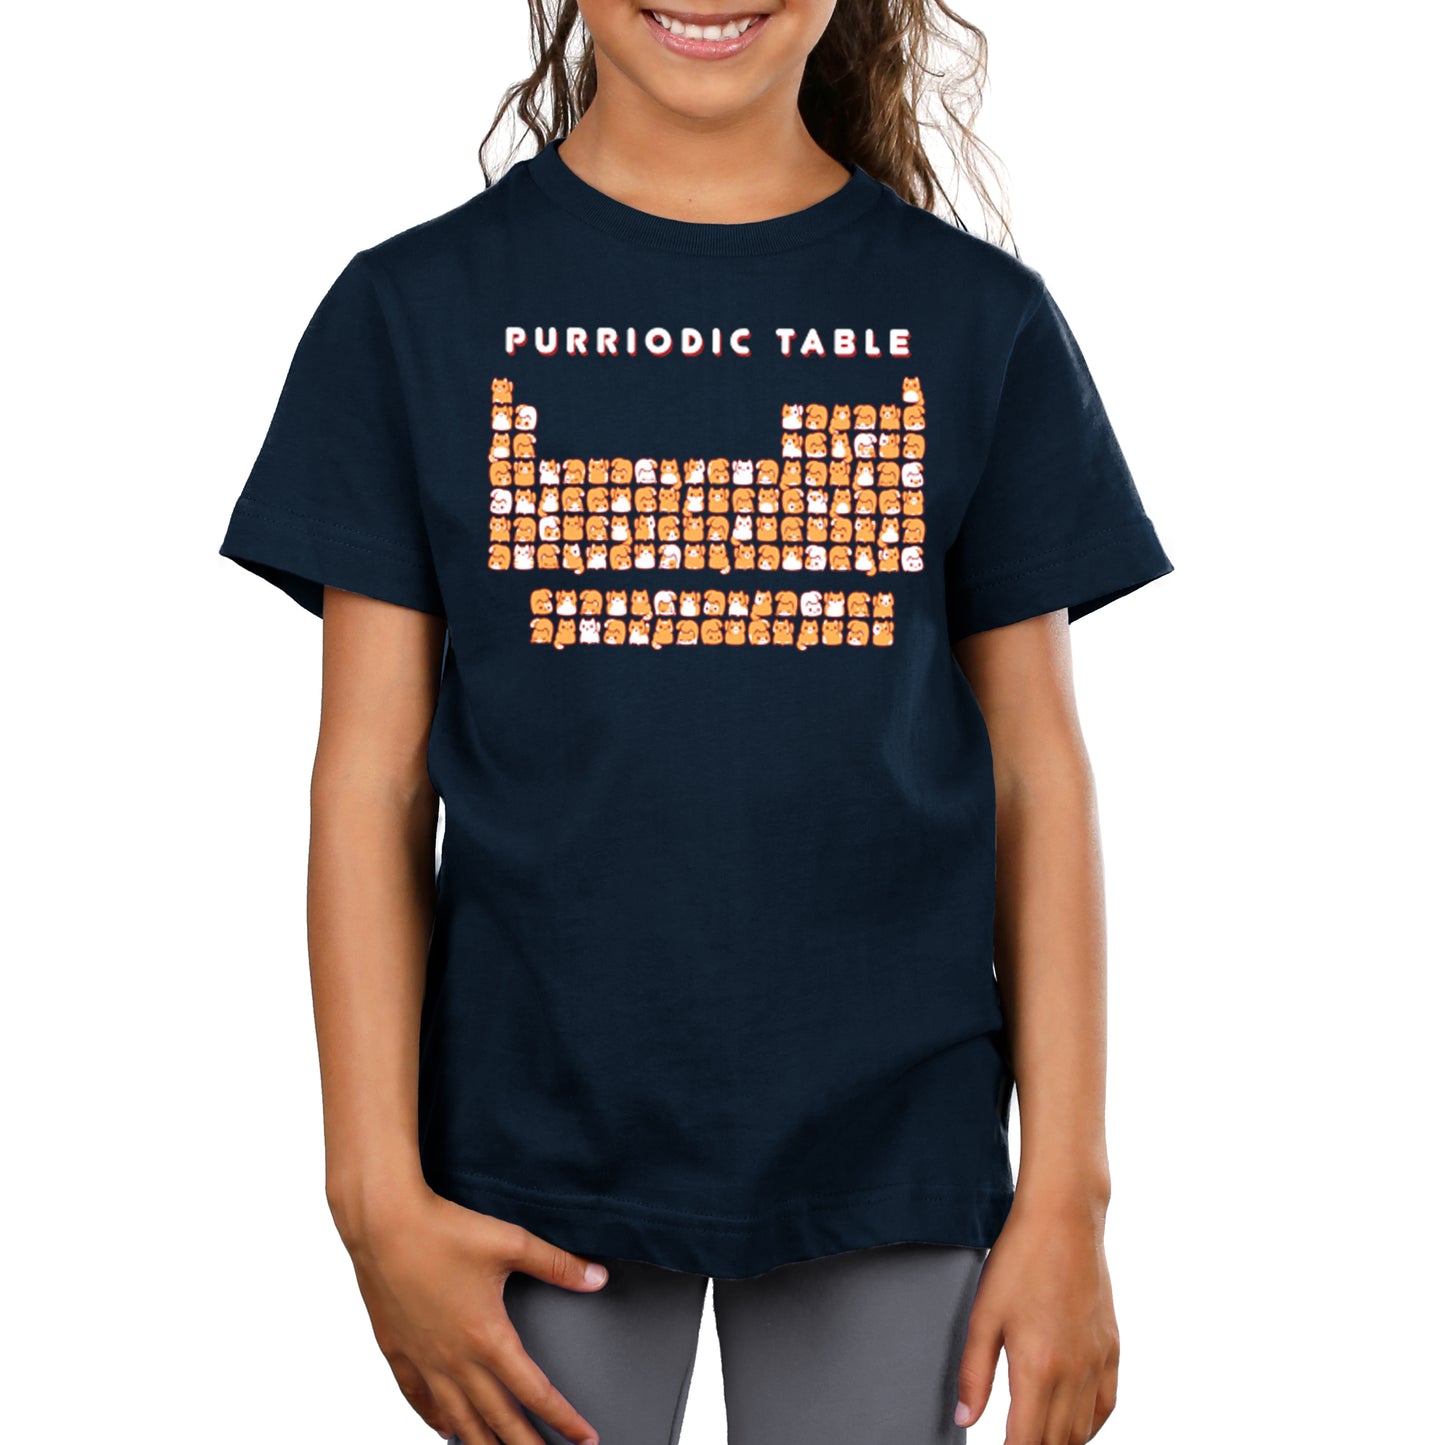 A girl wearing a Purriodic Table t-shirt by TeeTurtle, appealing to chemistry lovers.